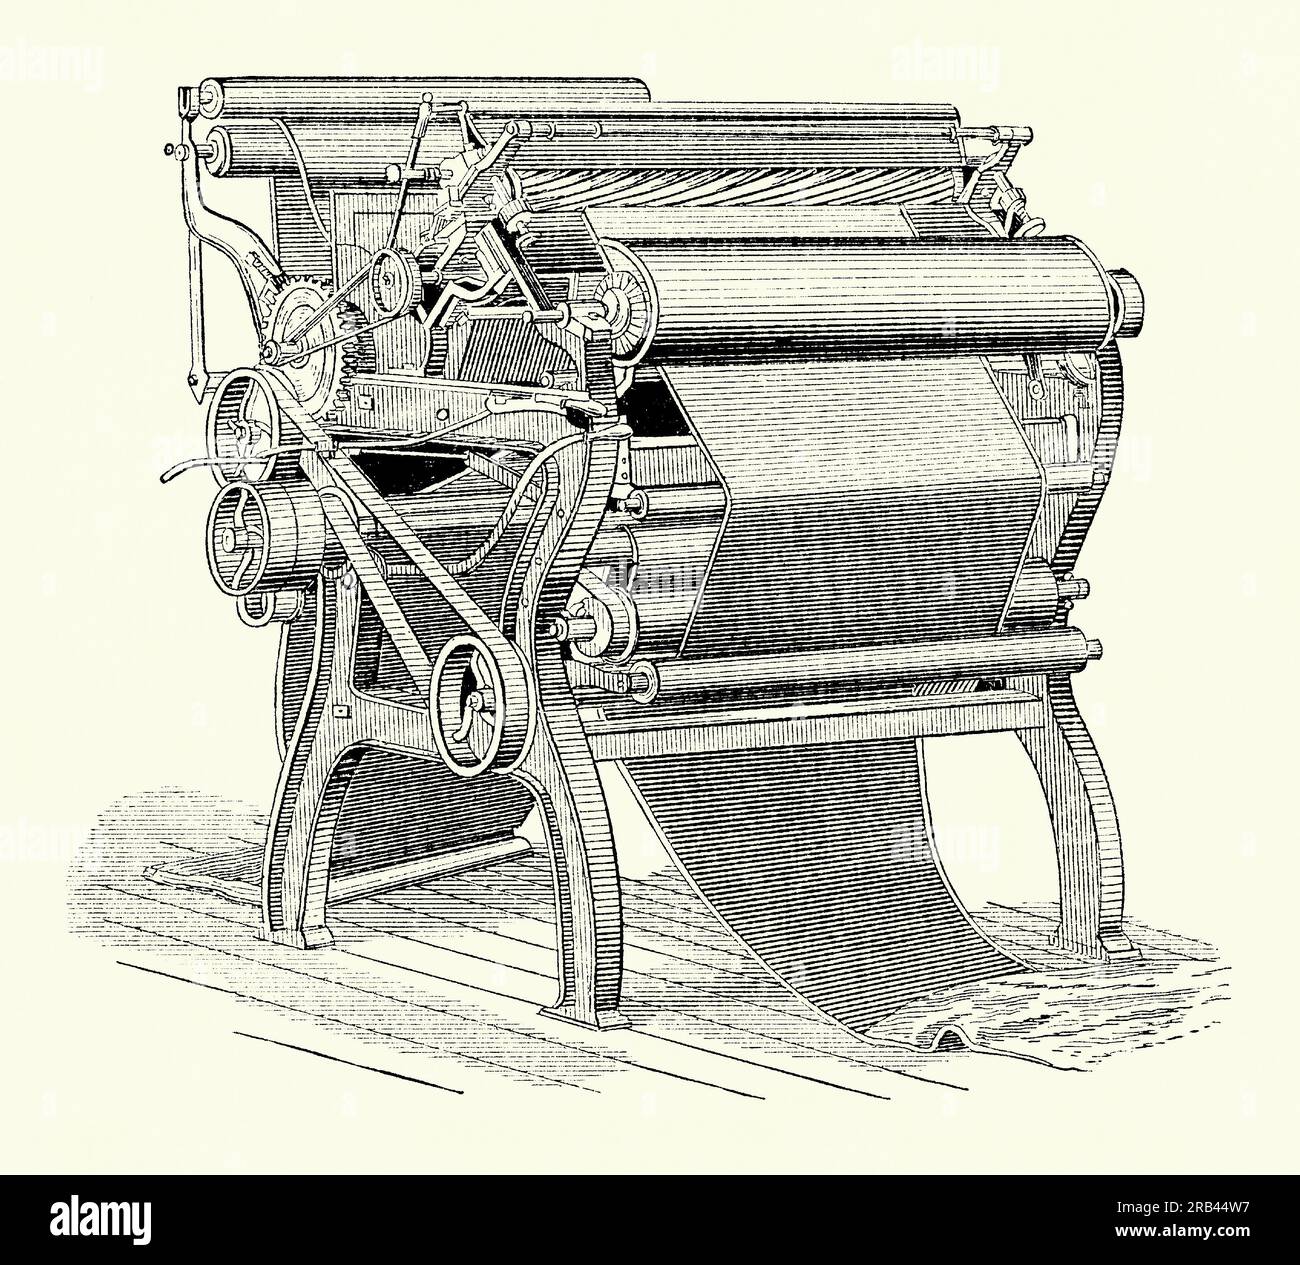 An old engraving of a shearing machine used in the textile mills of the 1800s. It is from a Victorian mechanical engineering book of the 1880s. Shearing where the fabric is enhanced by cutting the loops or raised surface pile to a uniform height. This machine usually has a rotating spiral cylinder blade similar to a lawn mower – the raw cloth is fed into the belt-driven shearer (right). Shearing was most commonly used to make woollen, worsted, moleskin and velvet fabrics. Often called gigging, napping or cropping, a smooth feel was produced by a gradual lowering of the nap (‘dry shearing’). Stock Photo